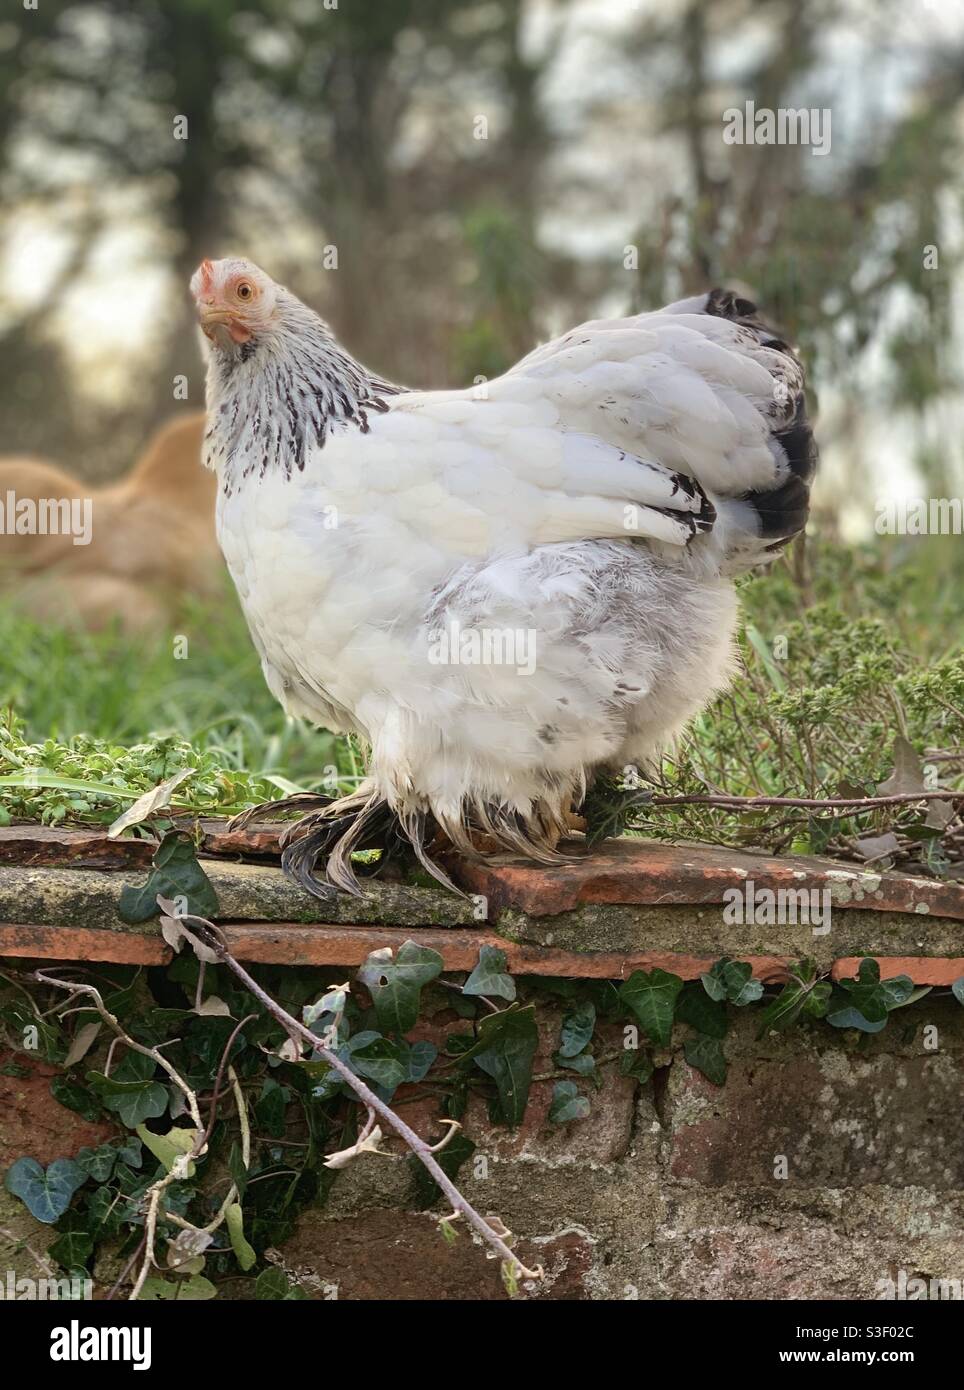 Young hen standing on brick wall Stock Photo